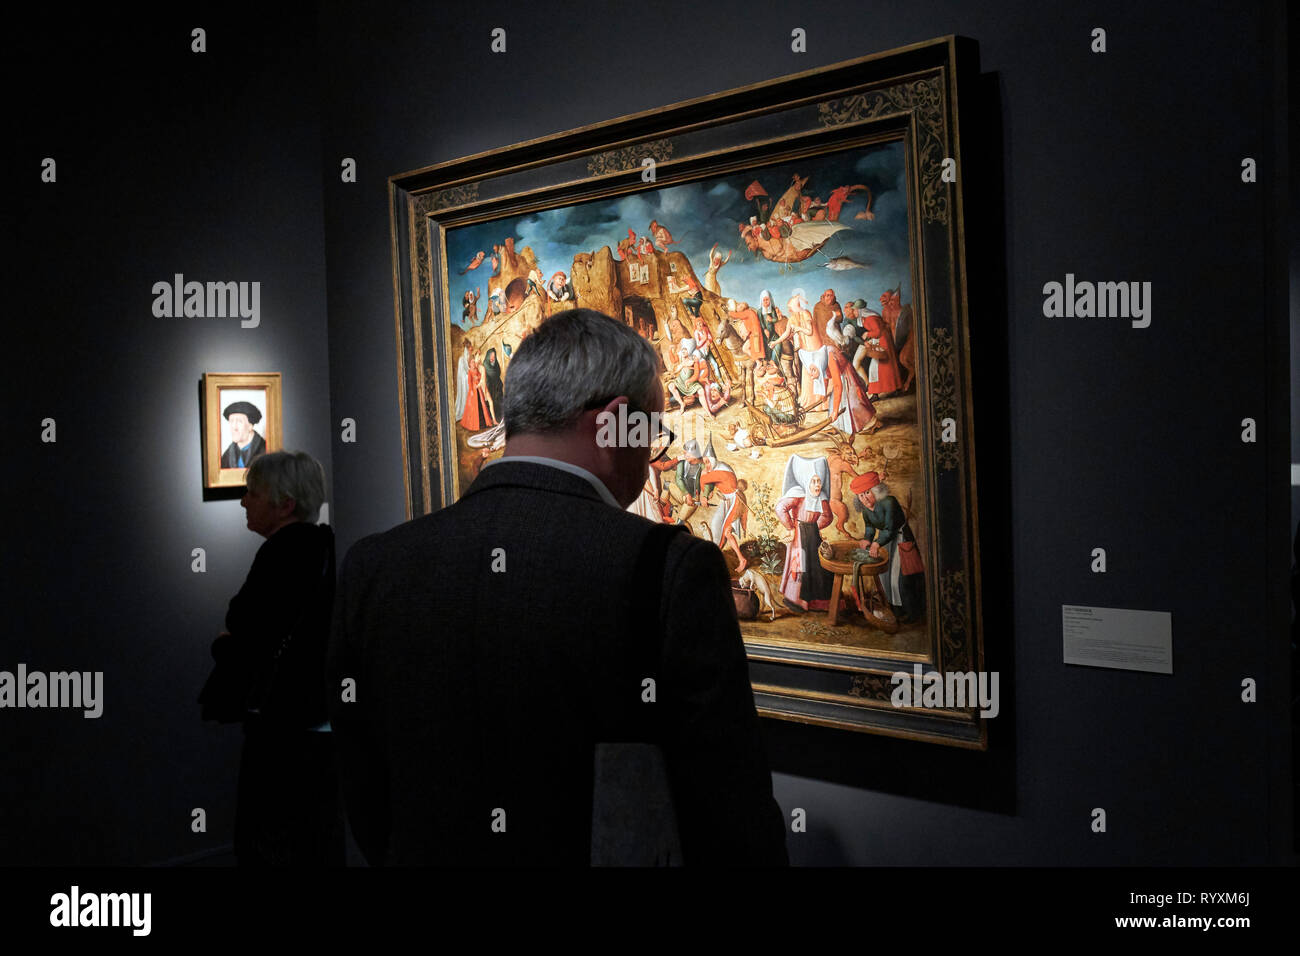 A visitor observes the paintings exhibited in one of the galleries participating in TEFAF. TEFAF (The European Fine Art Fair), one of the most famous art, antiques and design fairs in the world, is held once again this year. Every year, Maastricht hosts an event that brings together 275 galleries some twenty countries, about 30.000 exhibited art objects and has more than 75,000 attendees each year. Stock Photo